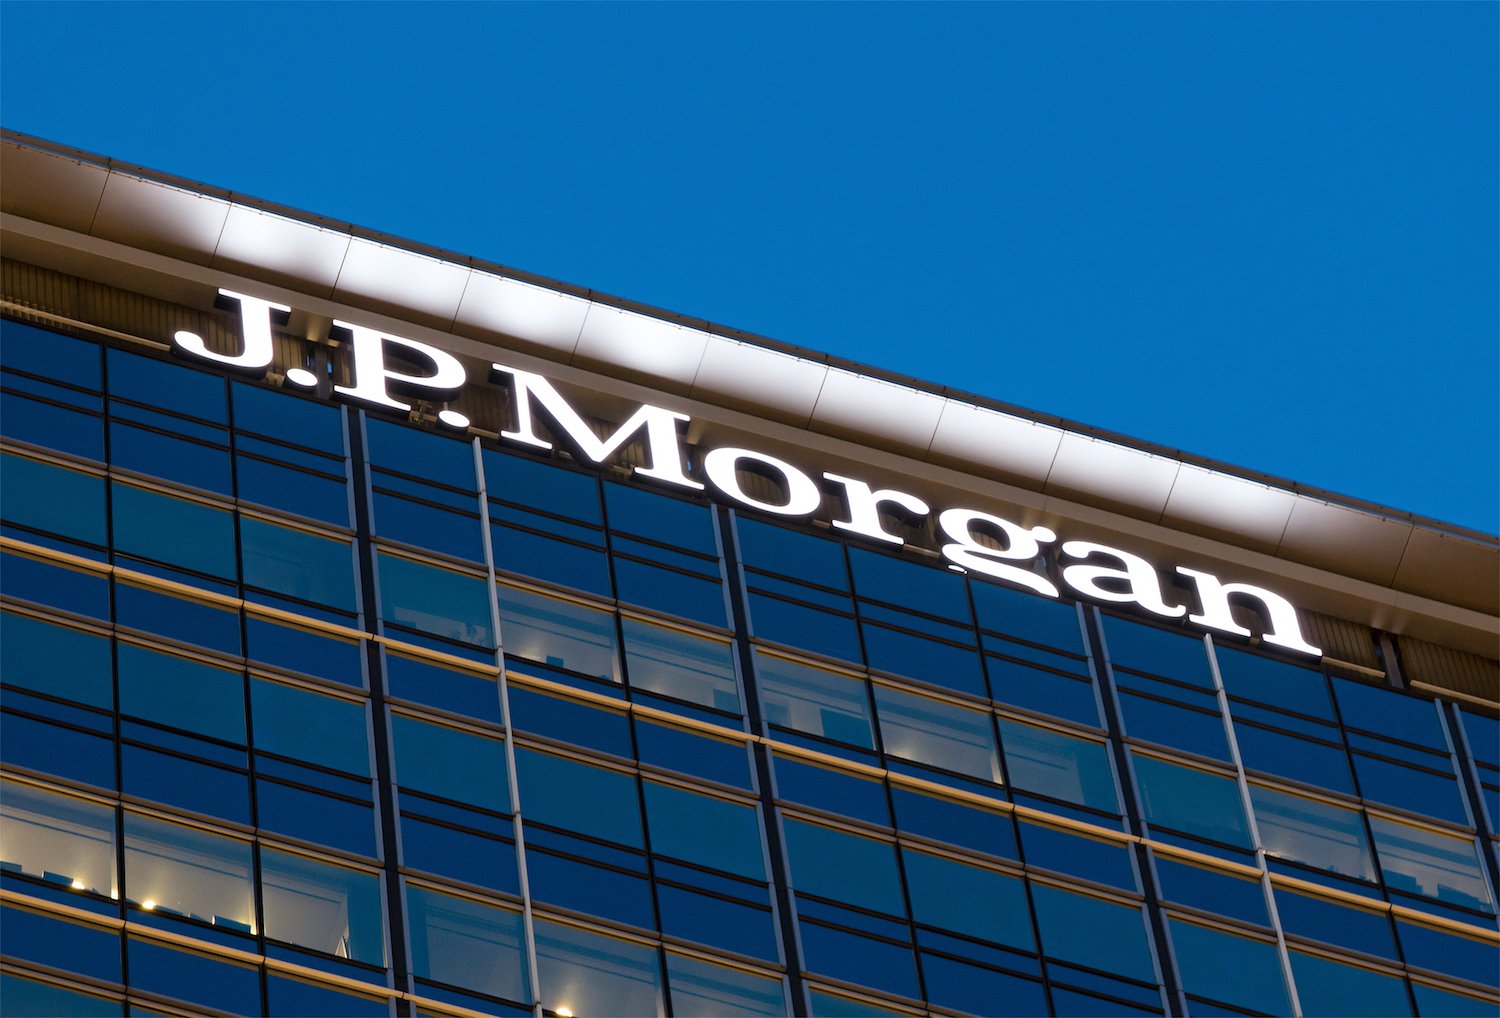 Over 75 New Banks: JPMorgan Expands Blockchain Payments Trial